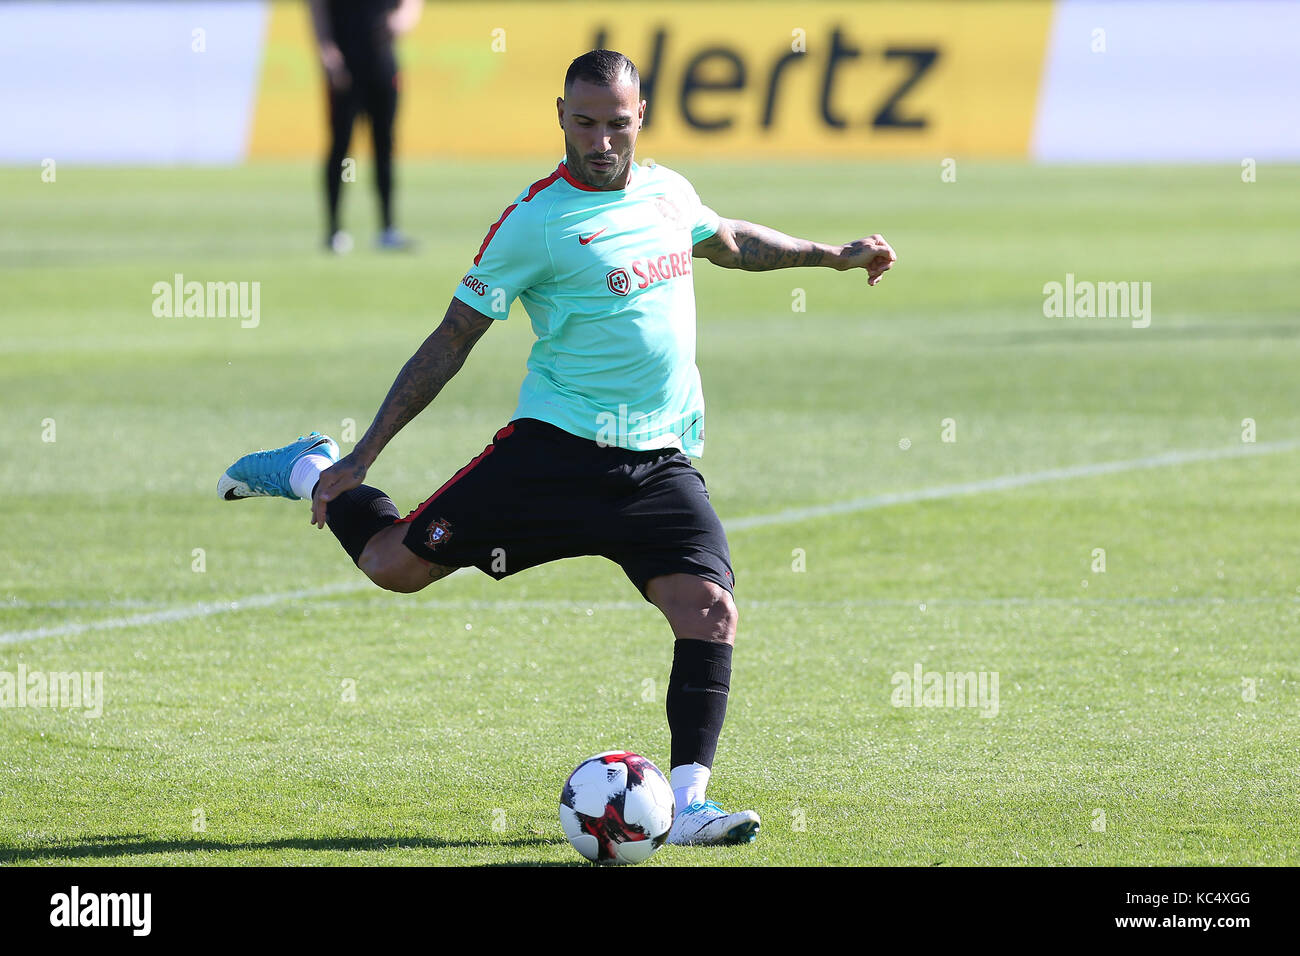 Lisbon, Portugal. 3rd Oct, 2017. Portugal's forward Ricardo Quaresma during National Team Training session before the match between Portugal and Andorra at City Football in Oeiras, Lisbon on October 3, 2017. Credit: Bruno Barros/Alamy Live News Stock Photo